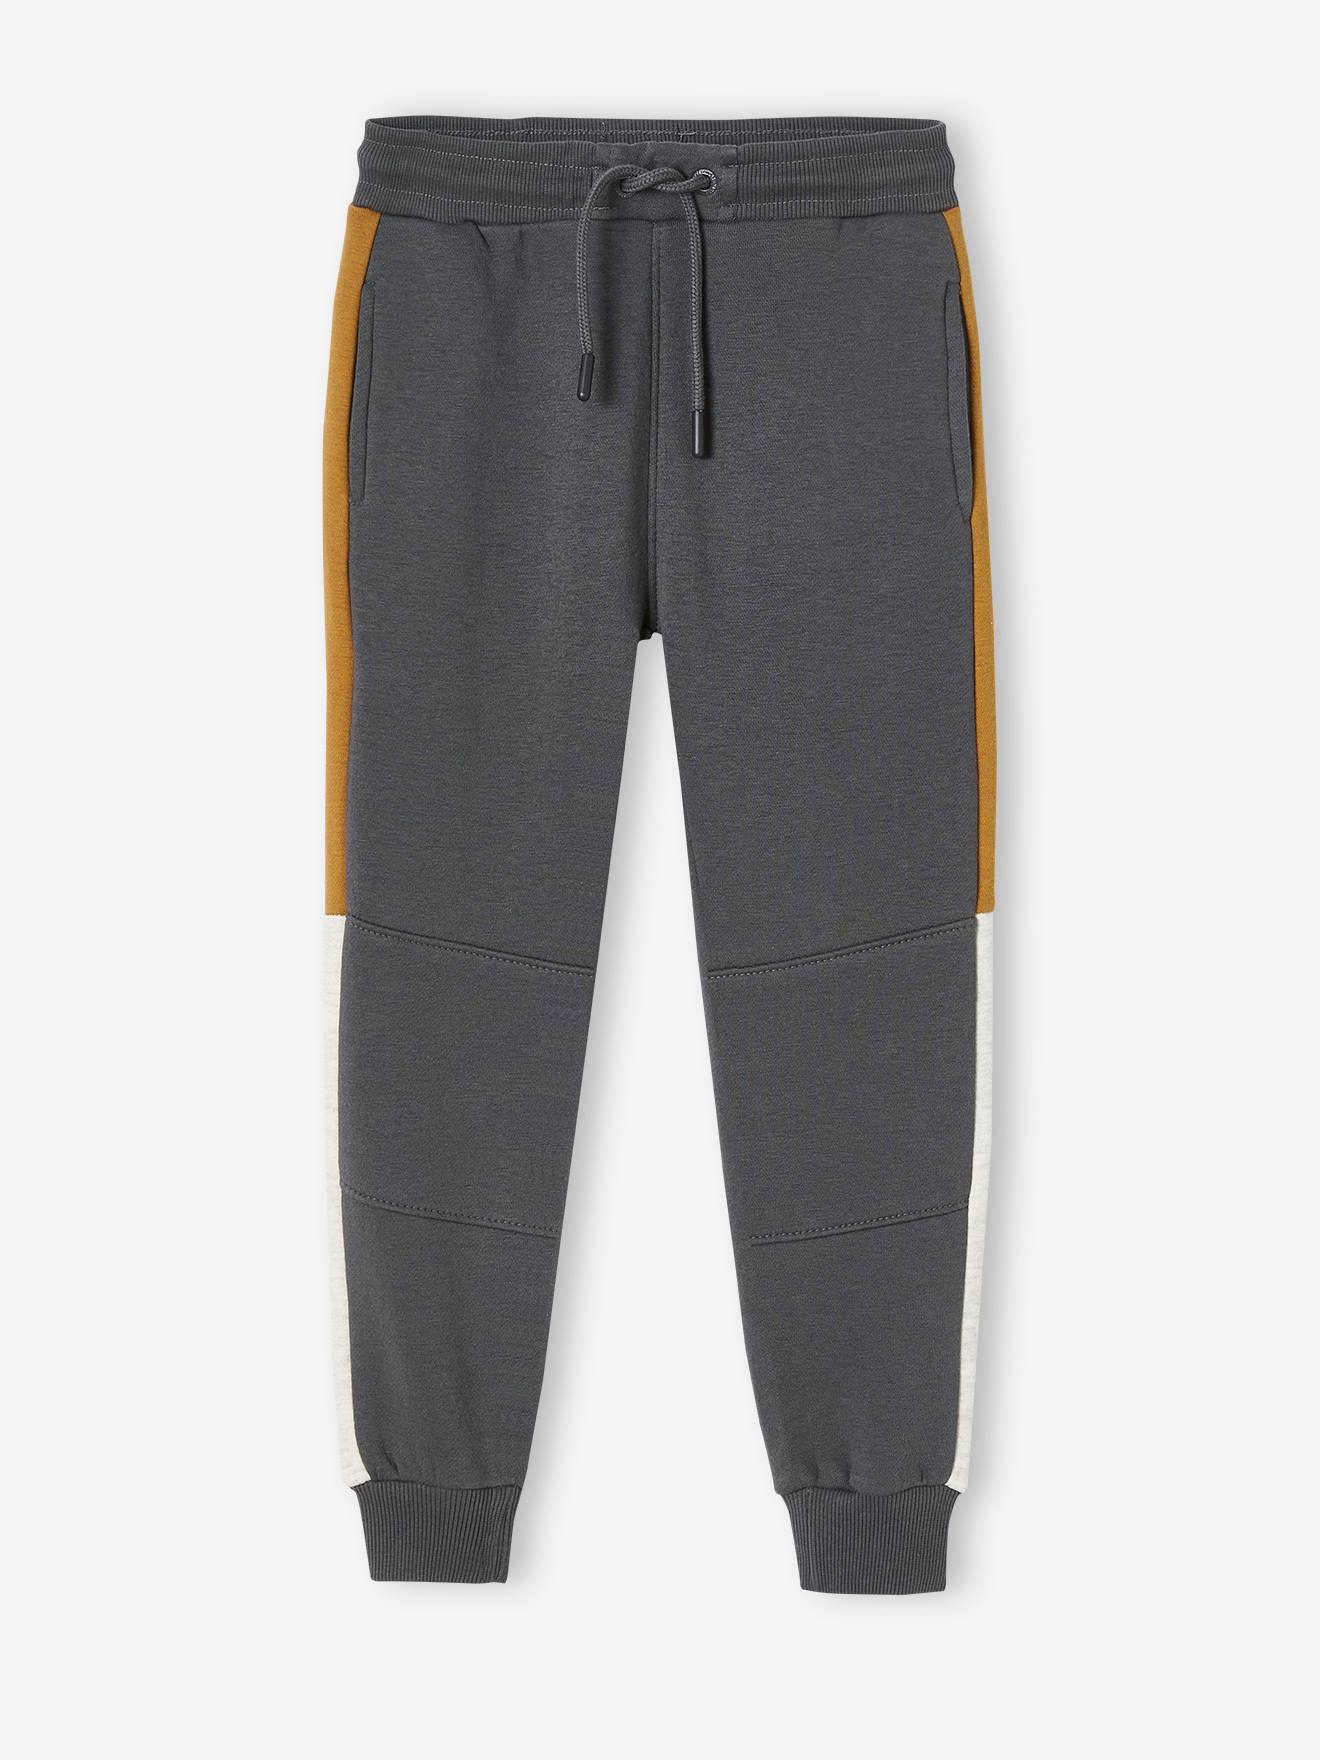 Fleece Joggers with Two-Tone Side Stripes for Boys grey dark solid with design